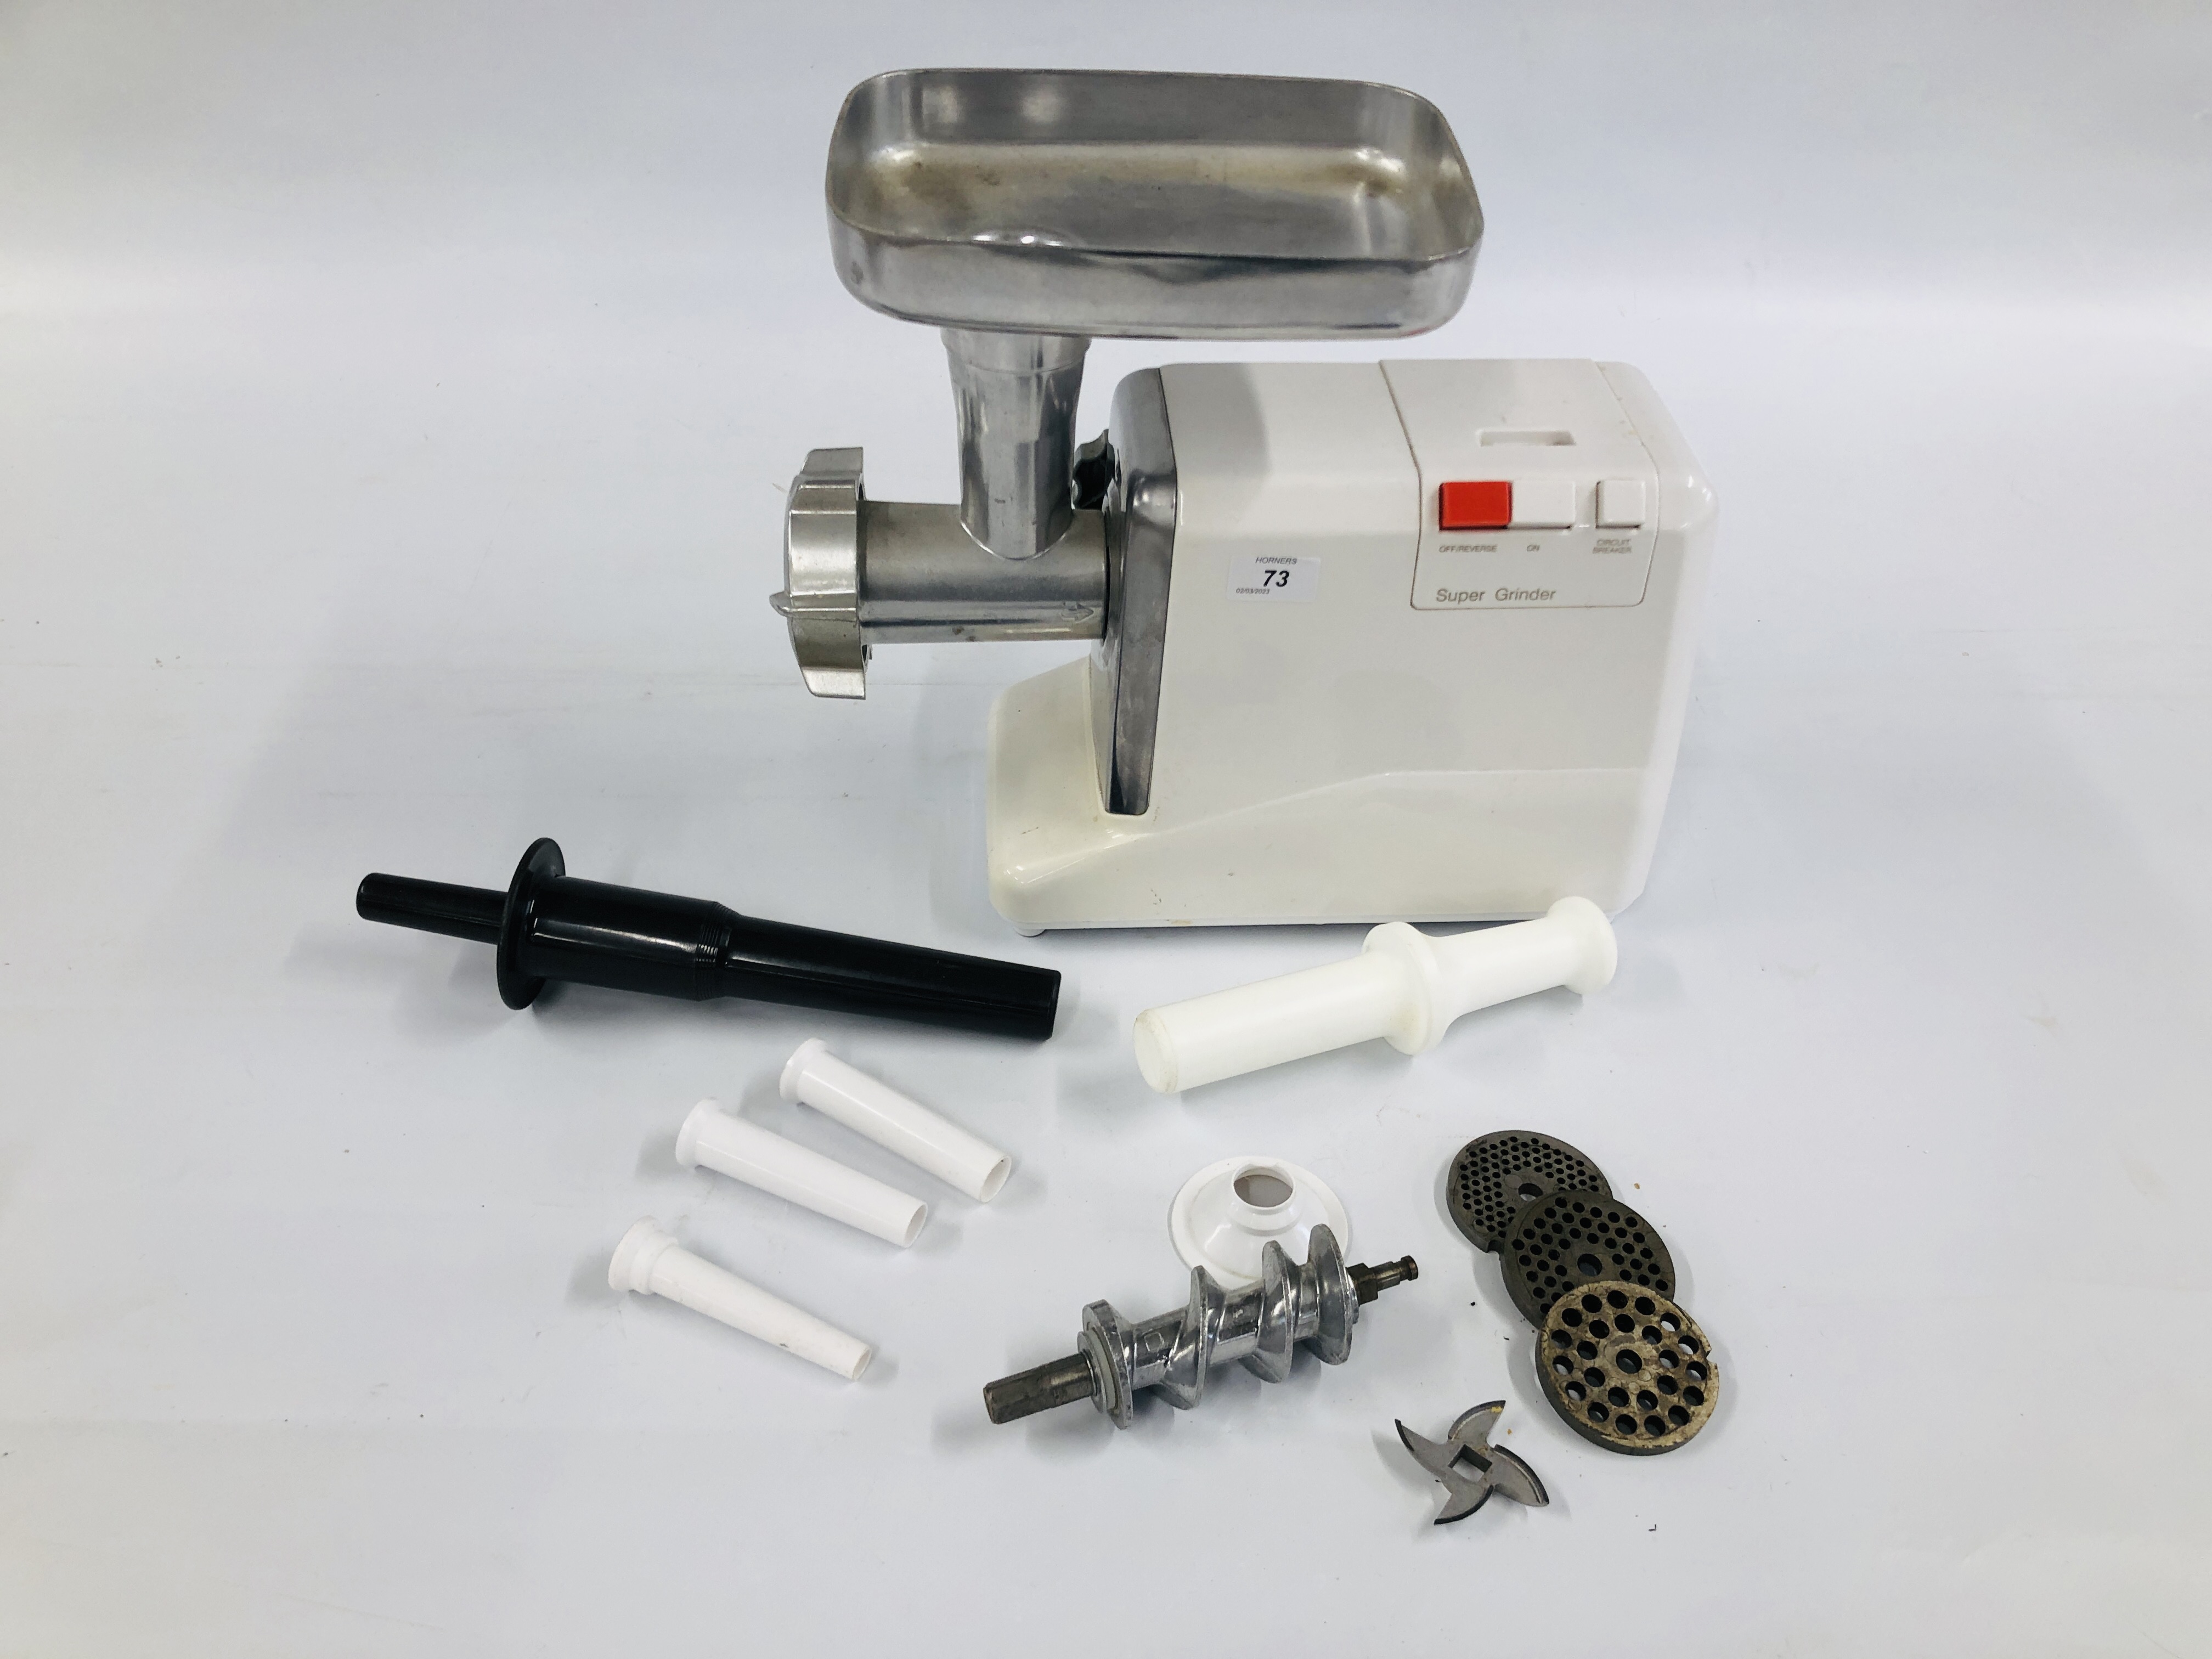 SUPER GRINDER PROFESSIONAL ELECTRIC MINCER WITH ACCESSORIES. - SOLD AS SEEN.